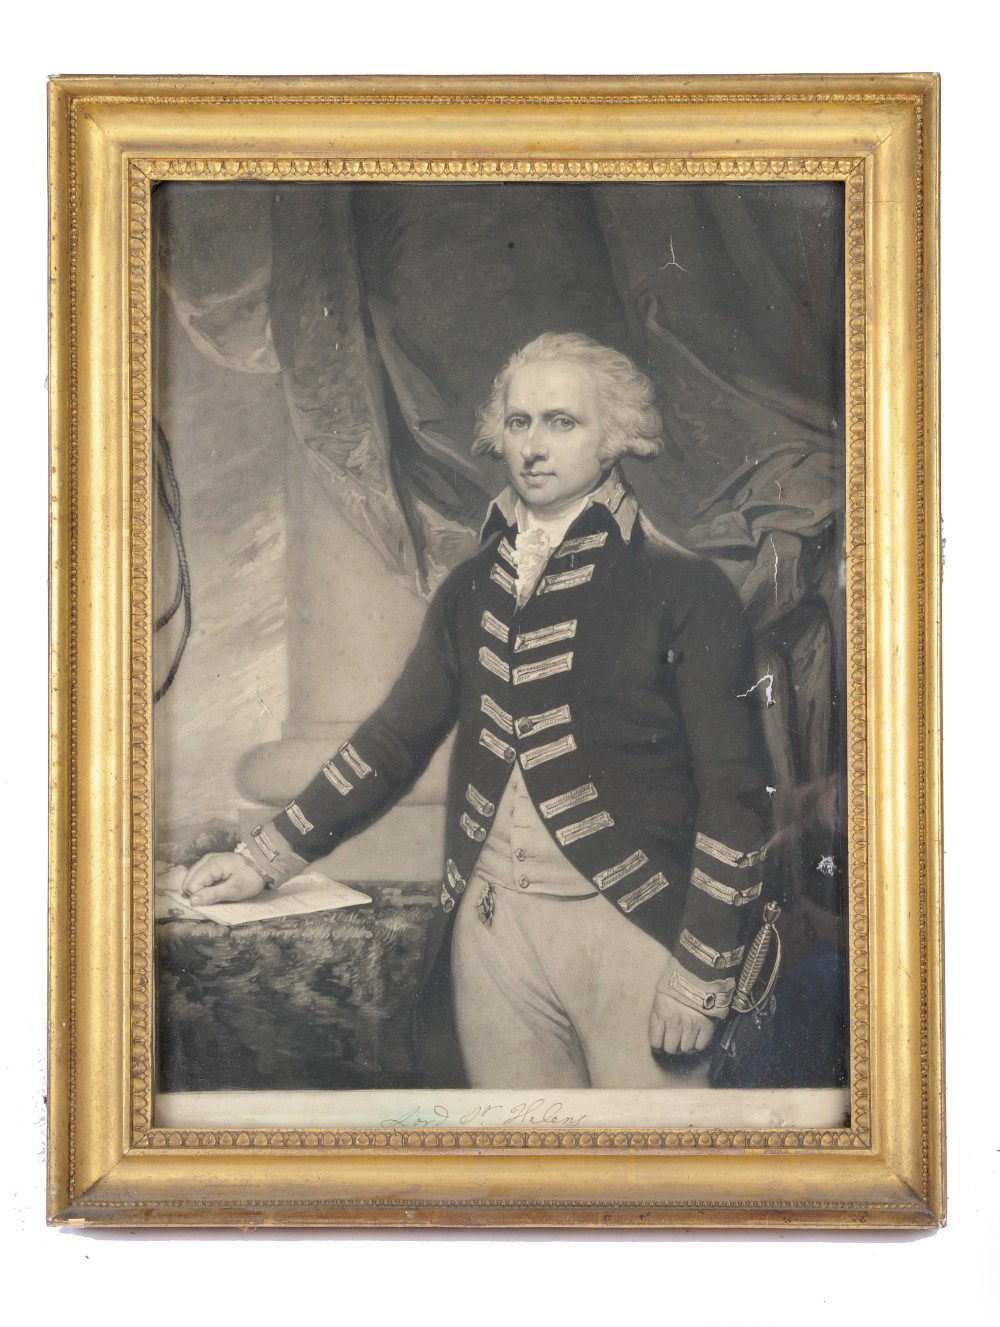 Collection of 18th-century framed mezzotint portraits: 'Jonas Hanway Esquire' (English traveller - Image 2 of 4